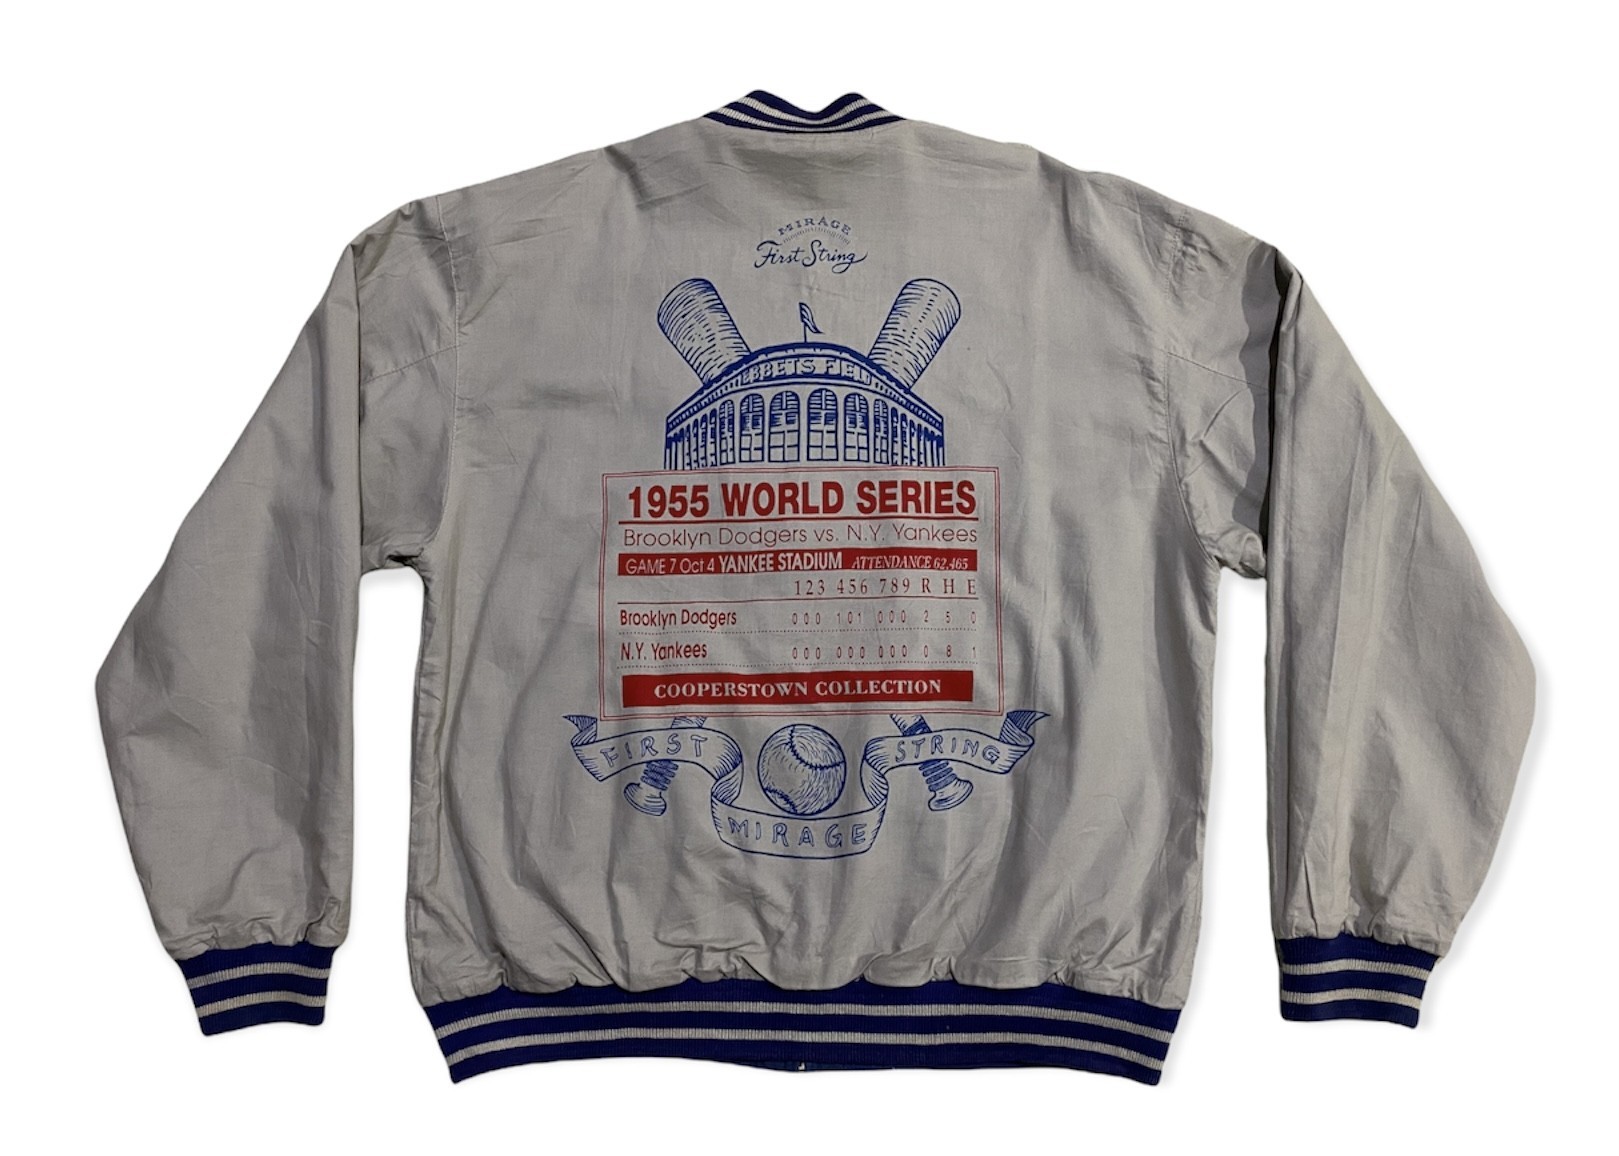 VTG REVERSIBLE Brooklyn Dodgers Cooperstown collection Jacket XL